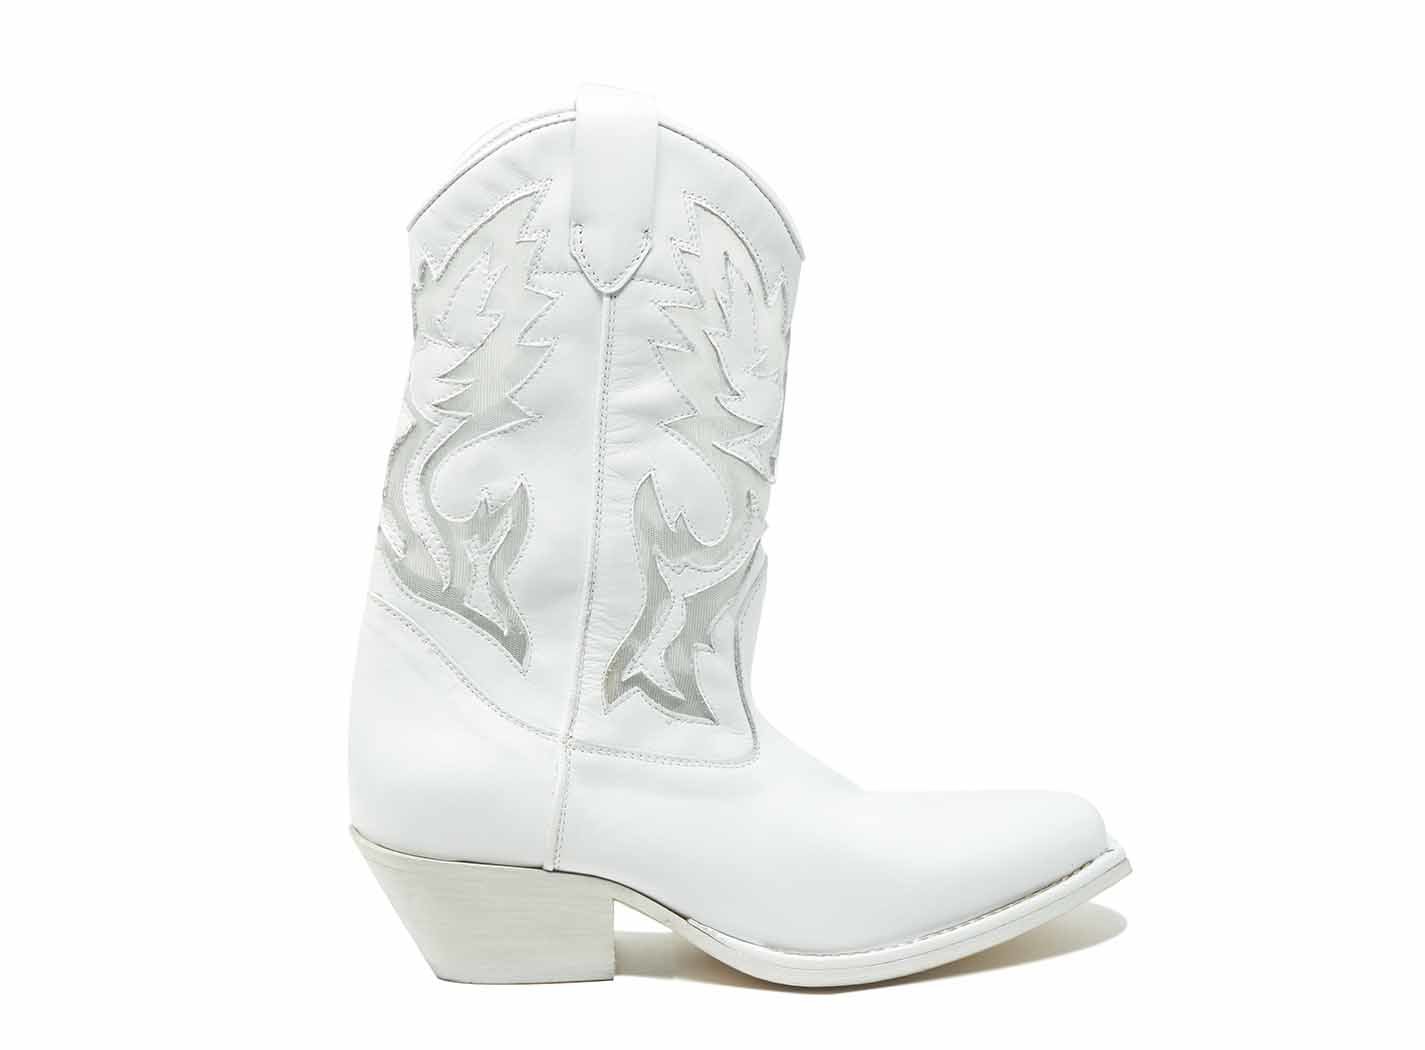 white color boots